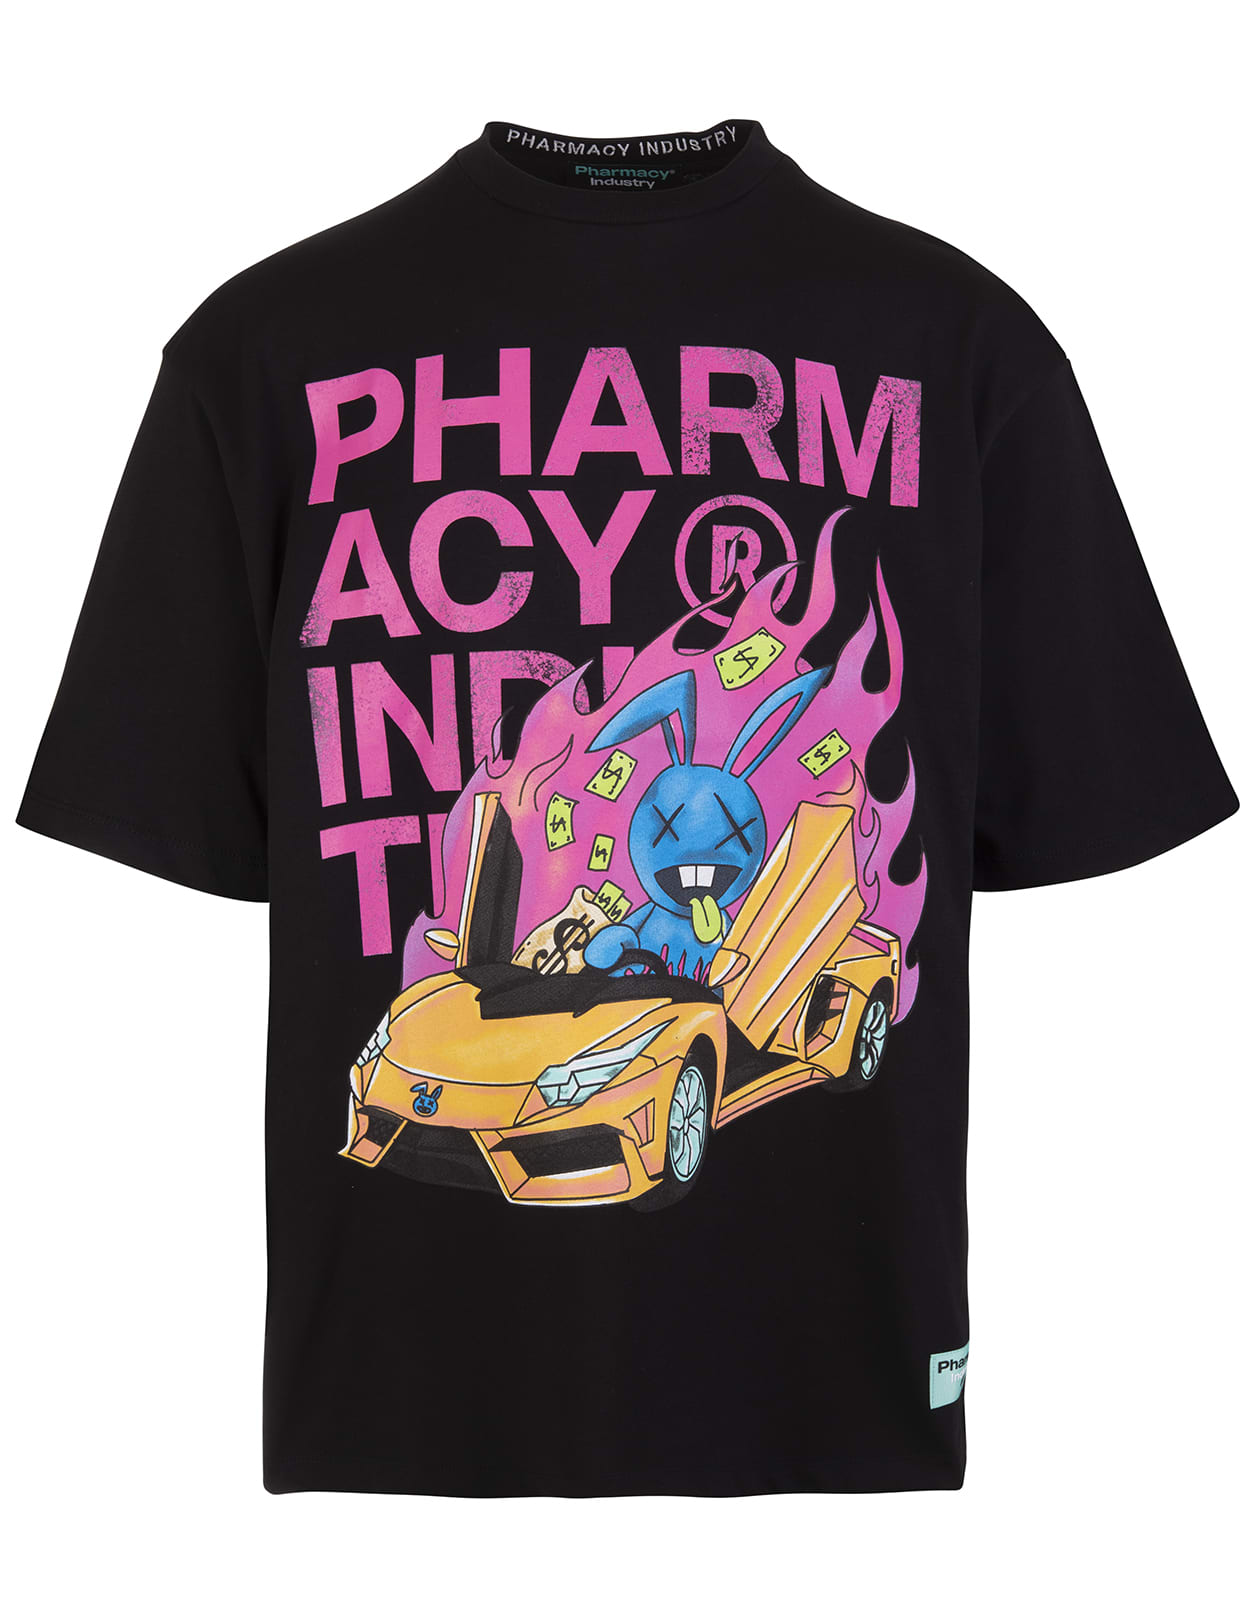 Pharmacy Industry Man Black T-shirt With Maxi Historical Logo Graphic Print